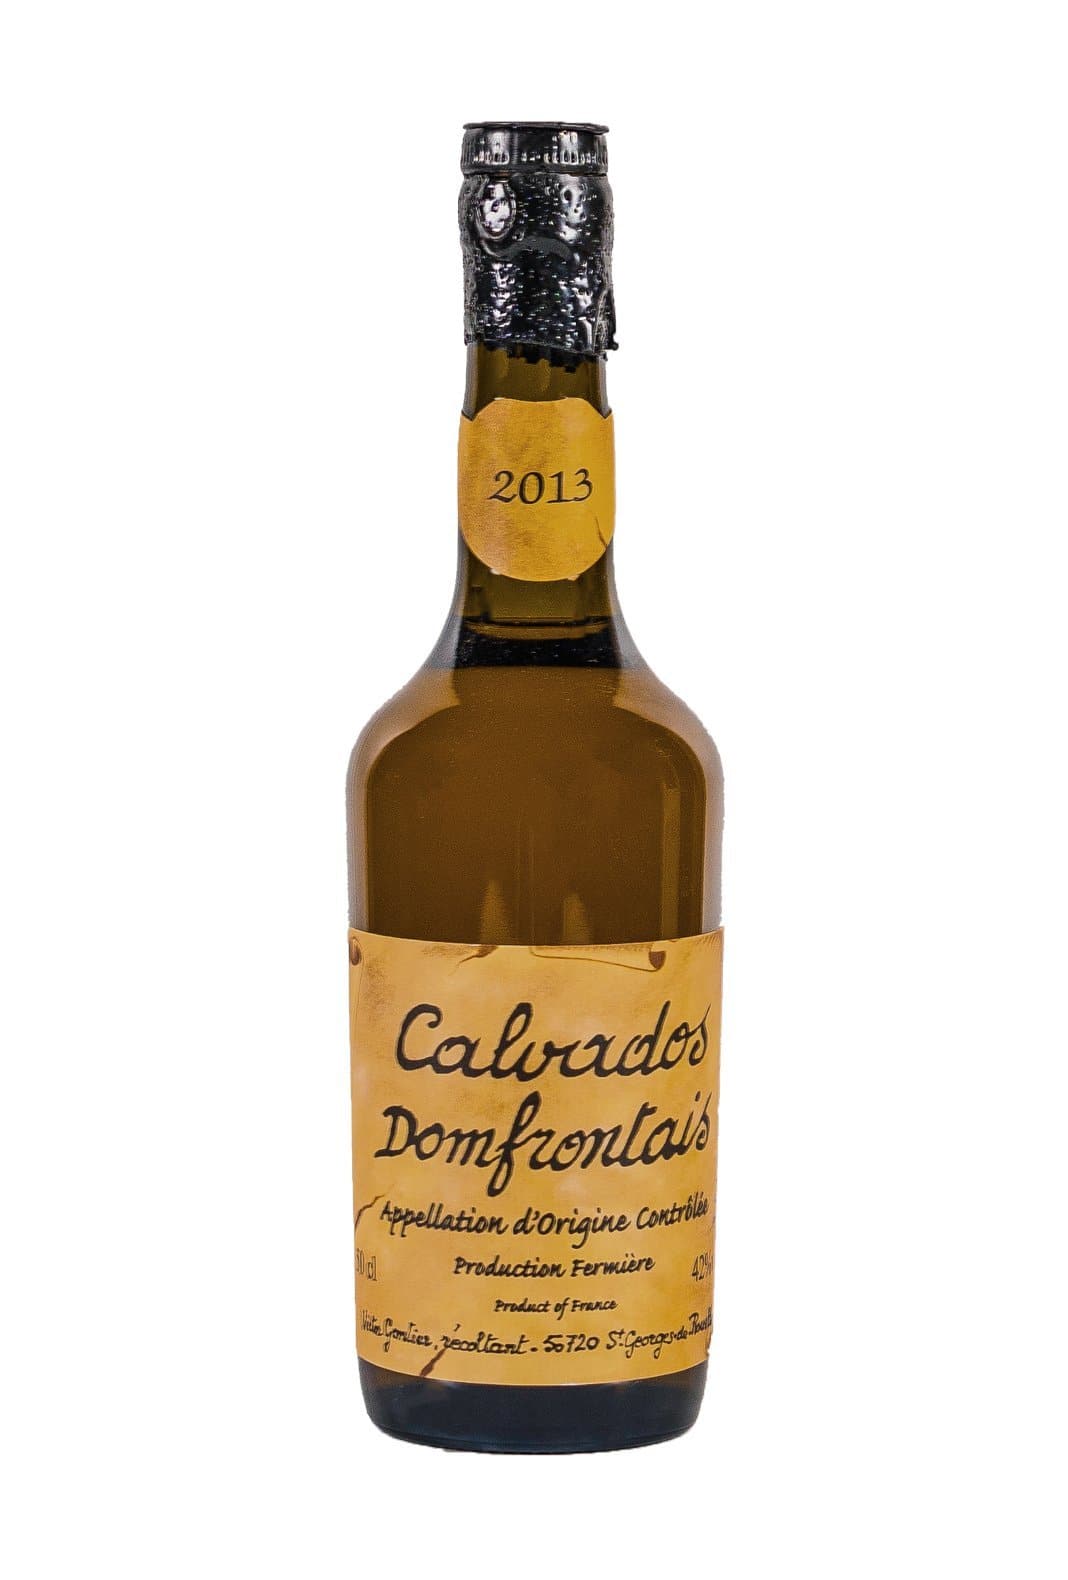 Victor Gontier Calvados Domfrontais 2013 40% 500ml | Brandy | Shop online at Spirits of France